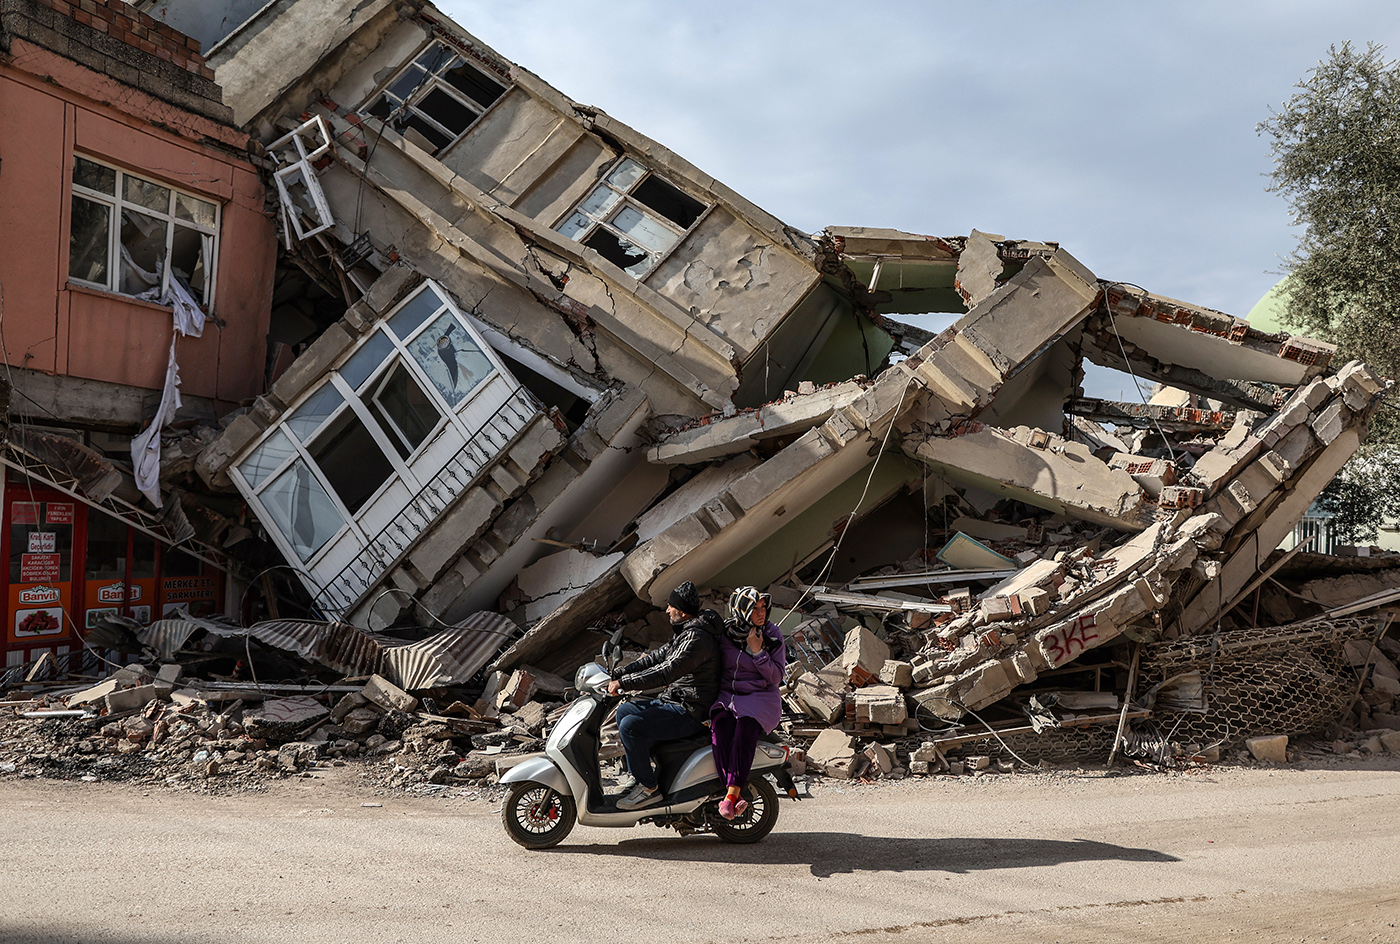 People pass by a motorcyle in front of a collepsed building after powerful earthquake in Adiyaman, Turkey, 19 February 2023. More than 45,000 people have died and thousands more are injured after two major earthquakes struck southern Turkey and northern Syria on 06 February. Authorities fear the death toll will keep climbing as rescuers look for survivors across the region.